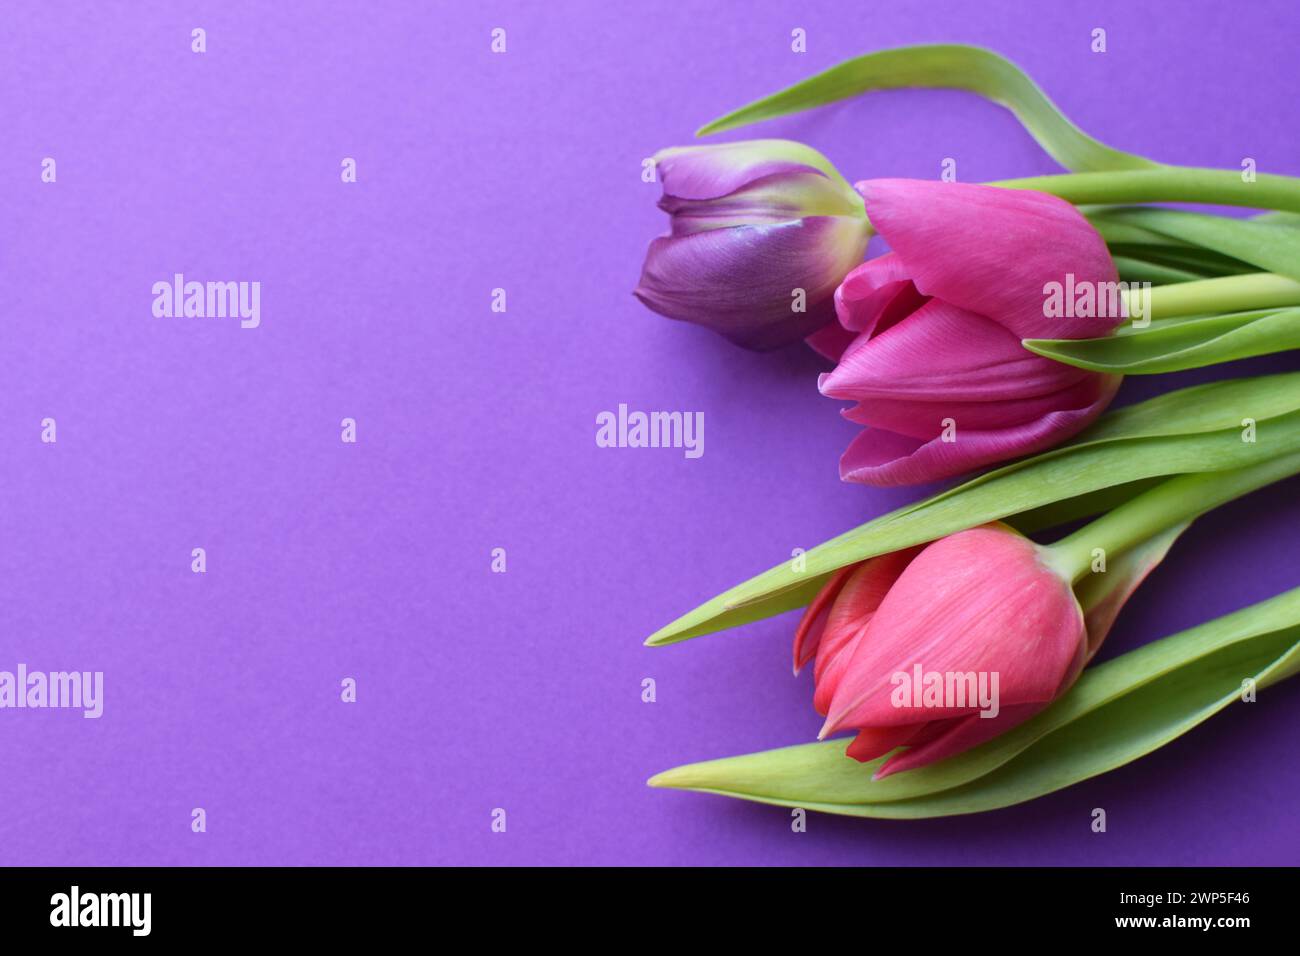 Bouquet of colorful spring tulips and place for text for Mother's Day or Women's Day on a purple background. Top view in flat style. Stock Photo